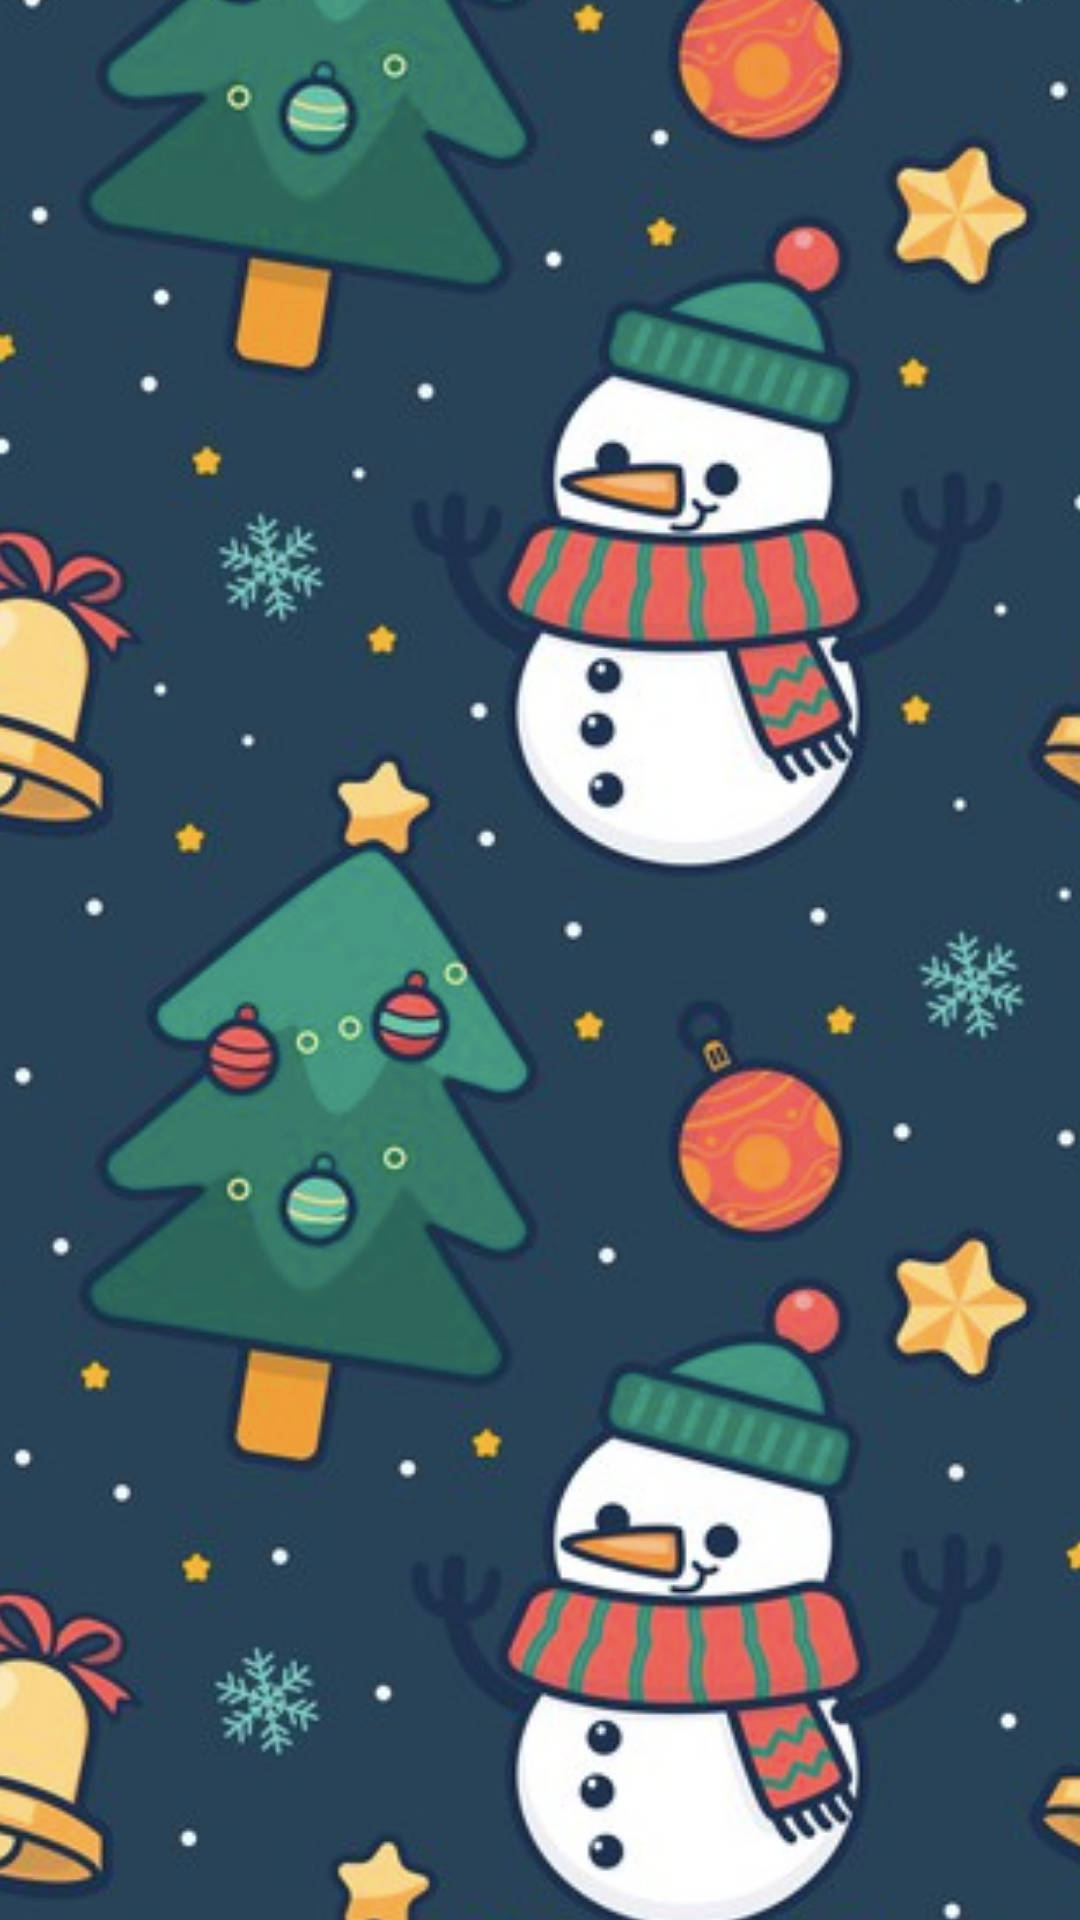 Cute Christmas Iphone Snowman And Tree Background